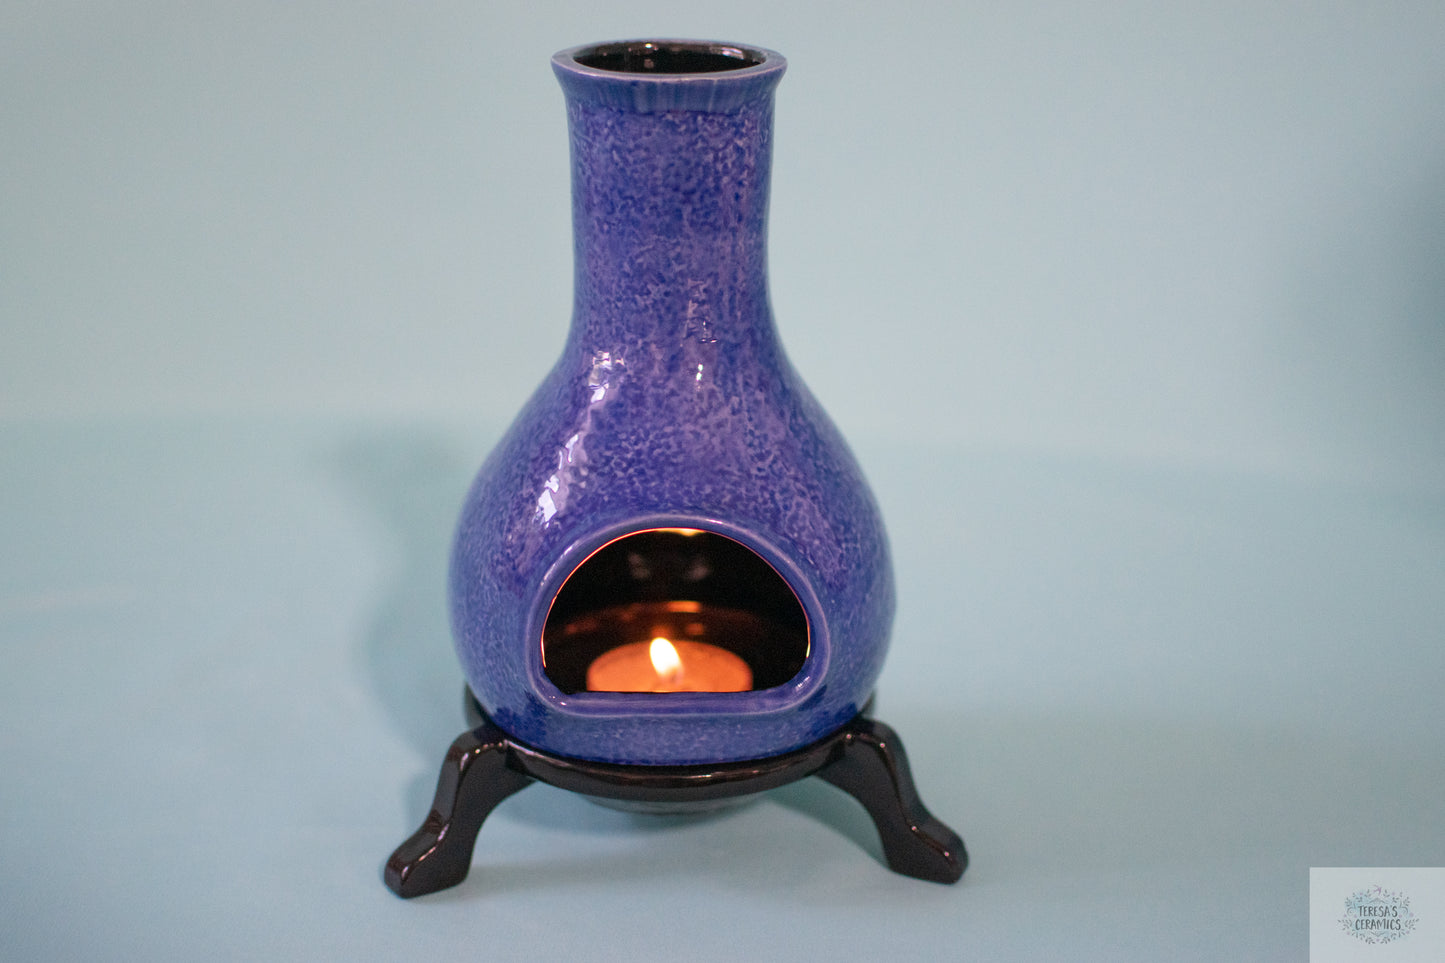 Ceramic Glazed Chimnea | Small Candle Holder | Boho Incense Holder | Mosaic Black & Blue | Choose Your Style | Rustic Garden Accent